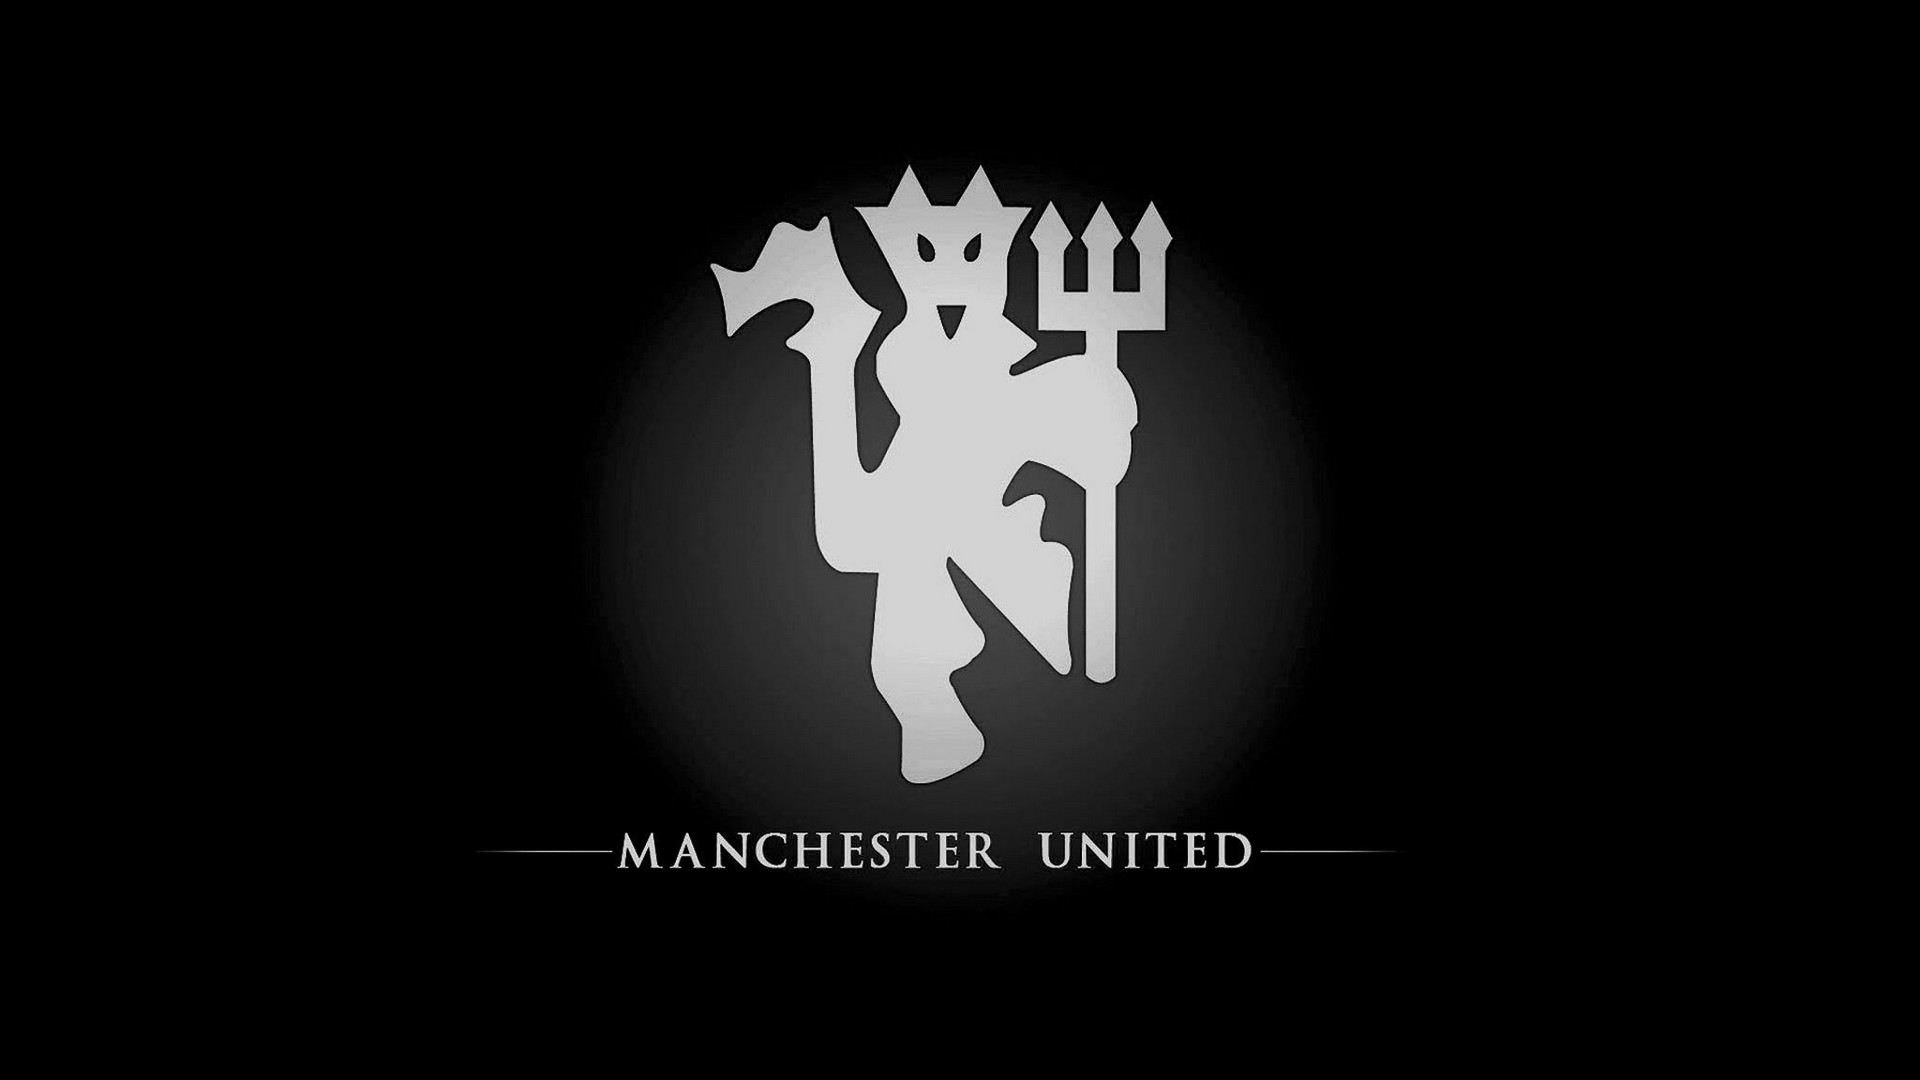 Wallpapers Manchester United with high-resolution 1920x1080 pixel. You can use this wallpaper for your Desktop Computers, Mac Screensavers, Windows Backgrounds, iPhone Wallpapers, Tablet or Android Lock screen and another Mobile device